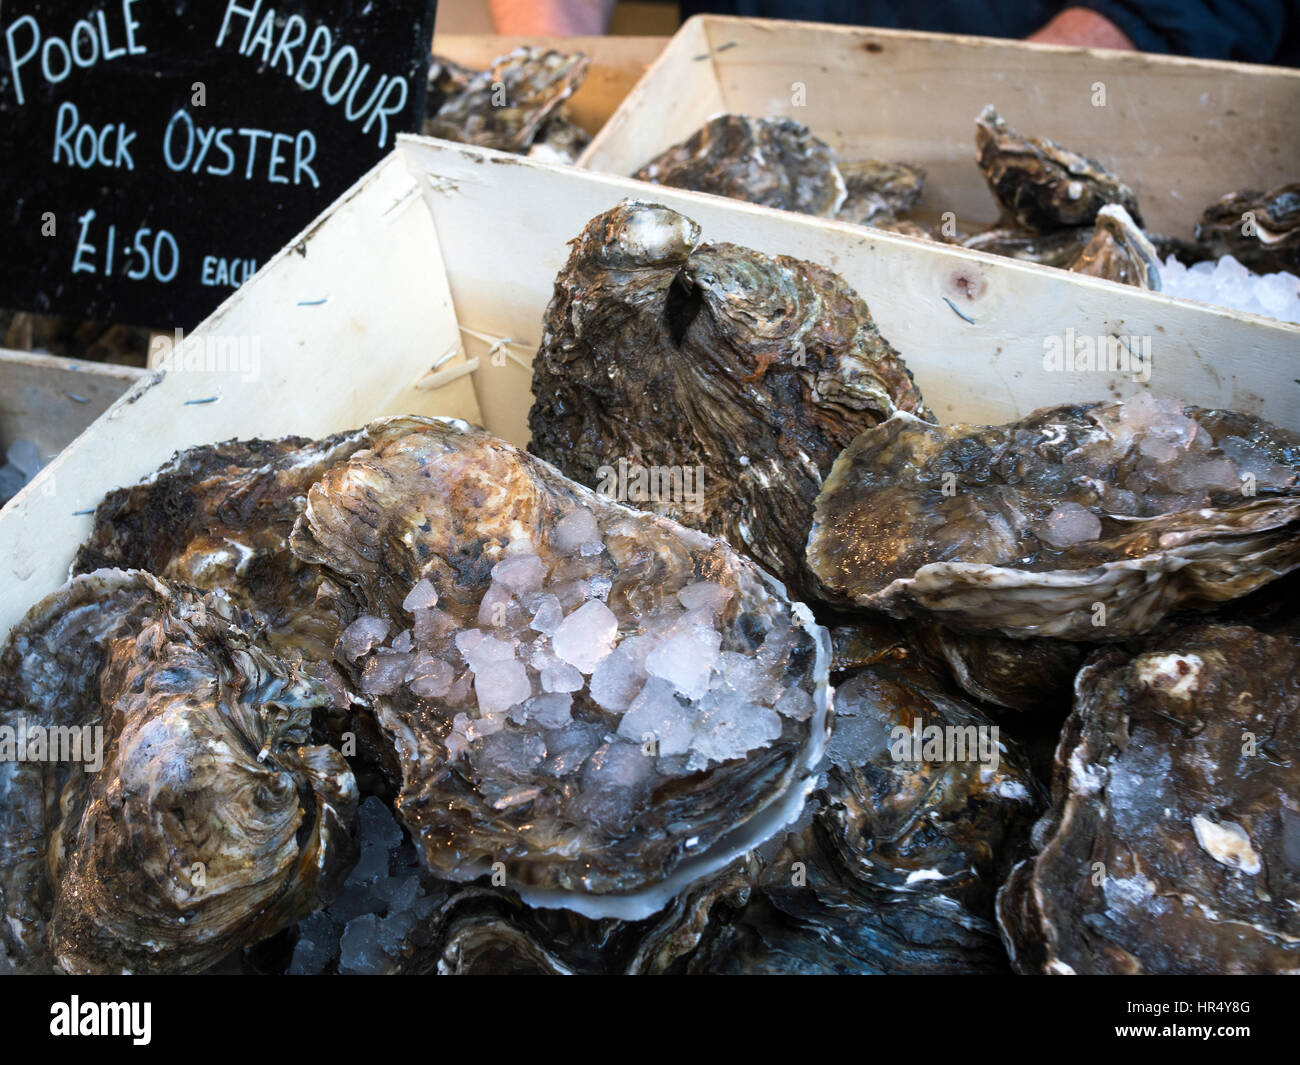 Oysters for Sale in Borough Market Stock Photo